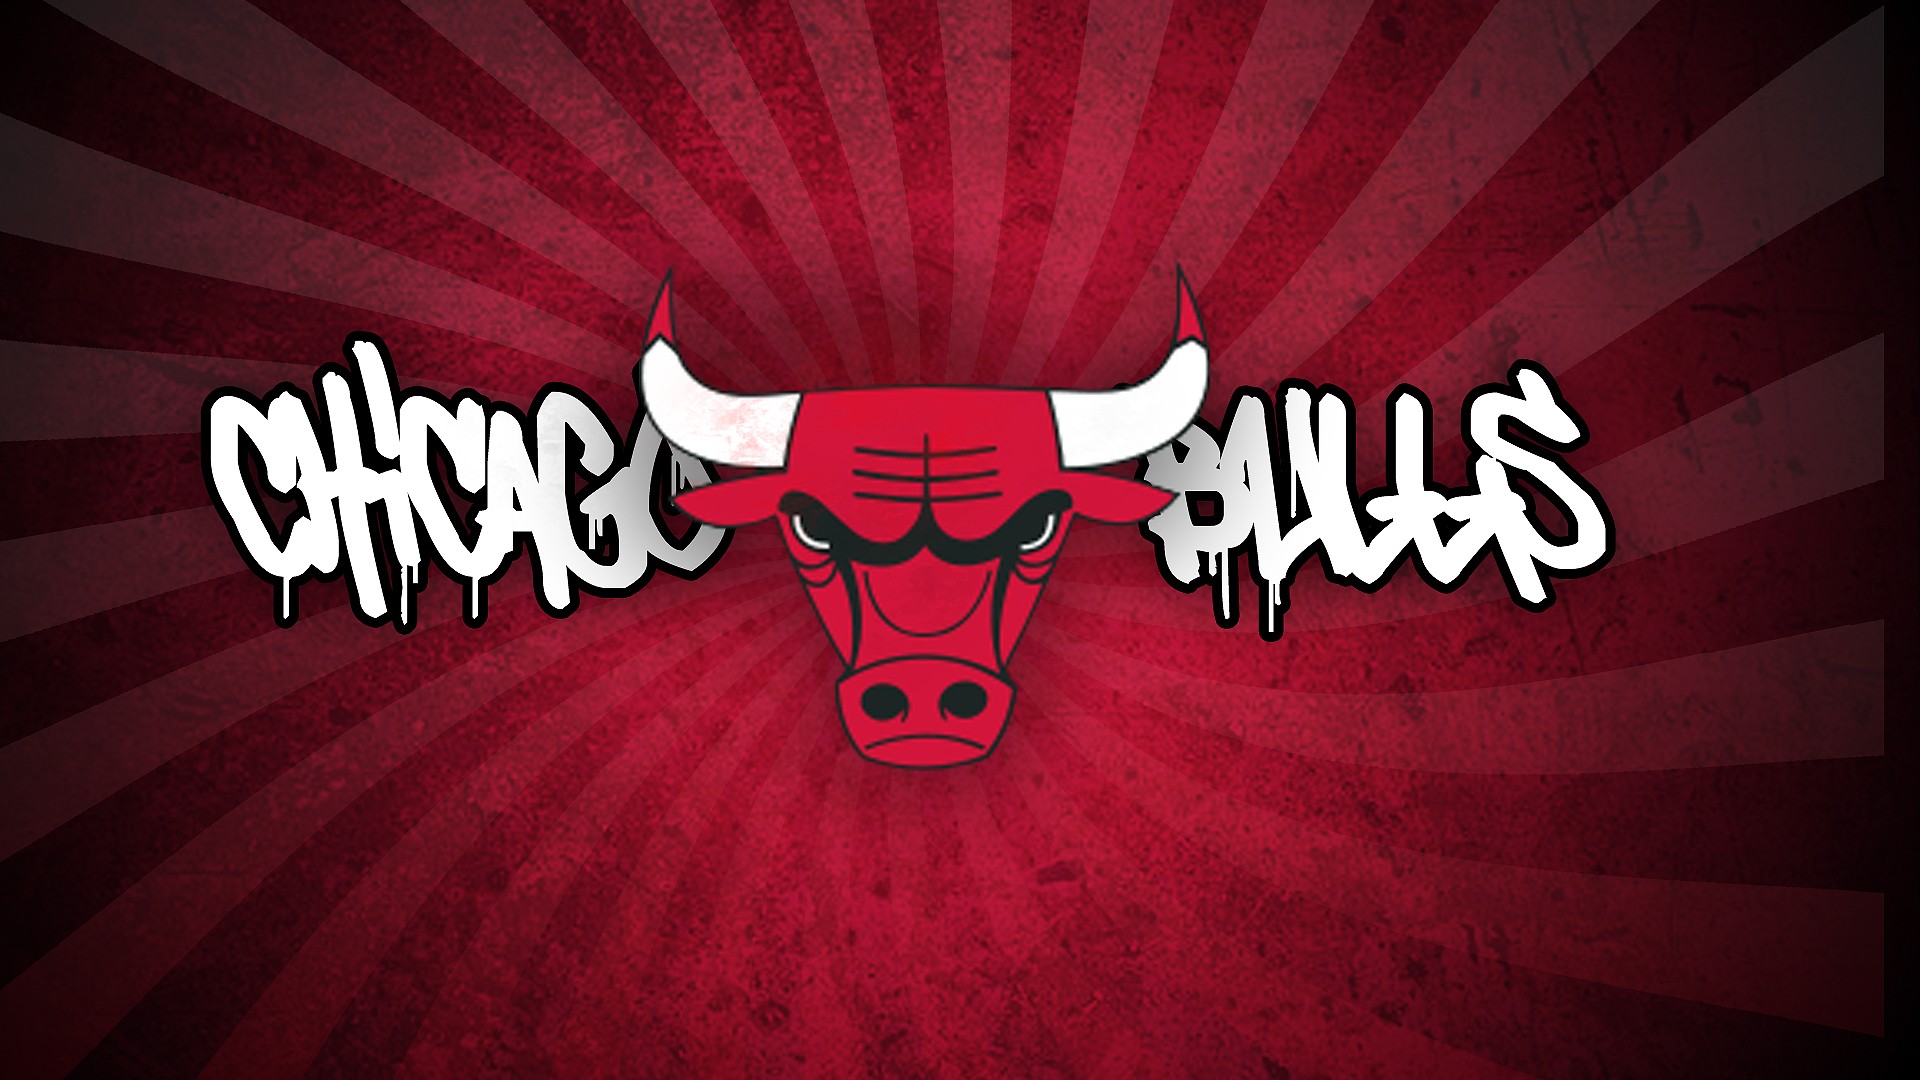 Windows Wallpaper Chicago Bulls with high-resolution 1920x1080 pixel. You can use this wallpaper for your Desktop Computer Backgrounds, Windows or Mac Screensavers, iPhone Lock screen, Tablet or Android and another Mobile Phone device